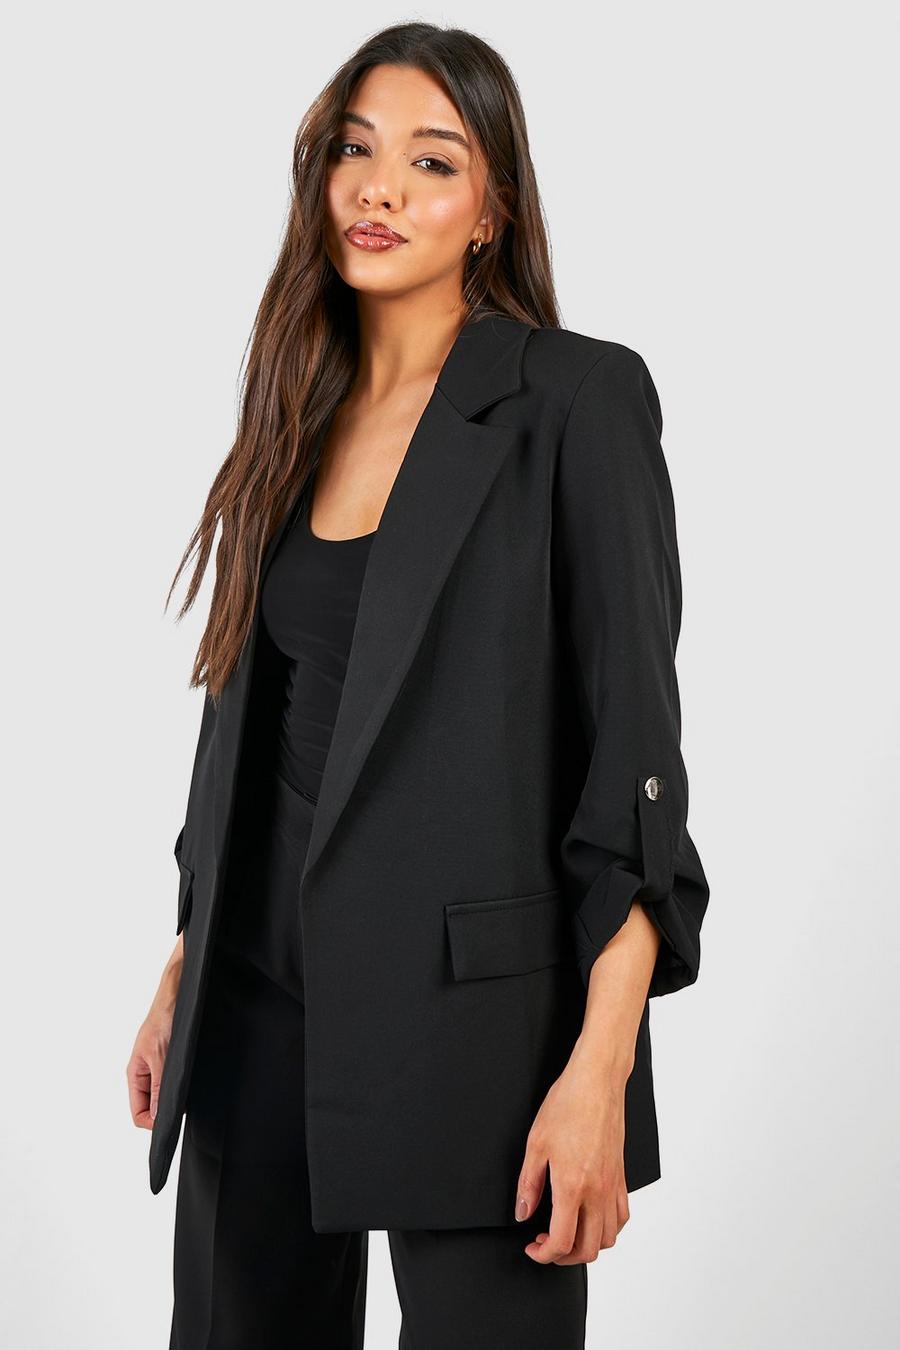 Black Gold Button Turn Cuff Relaxed Fit Blazer